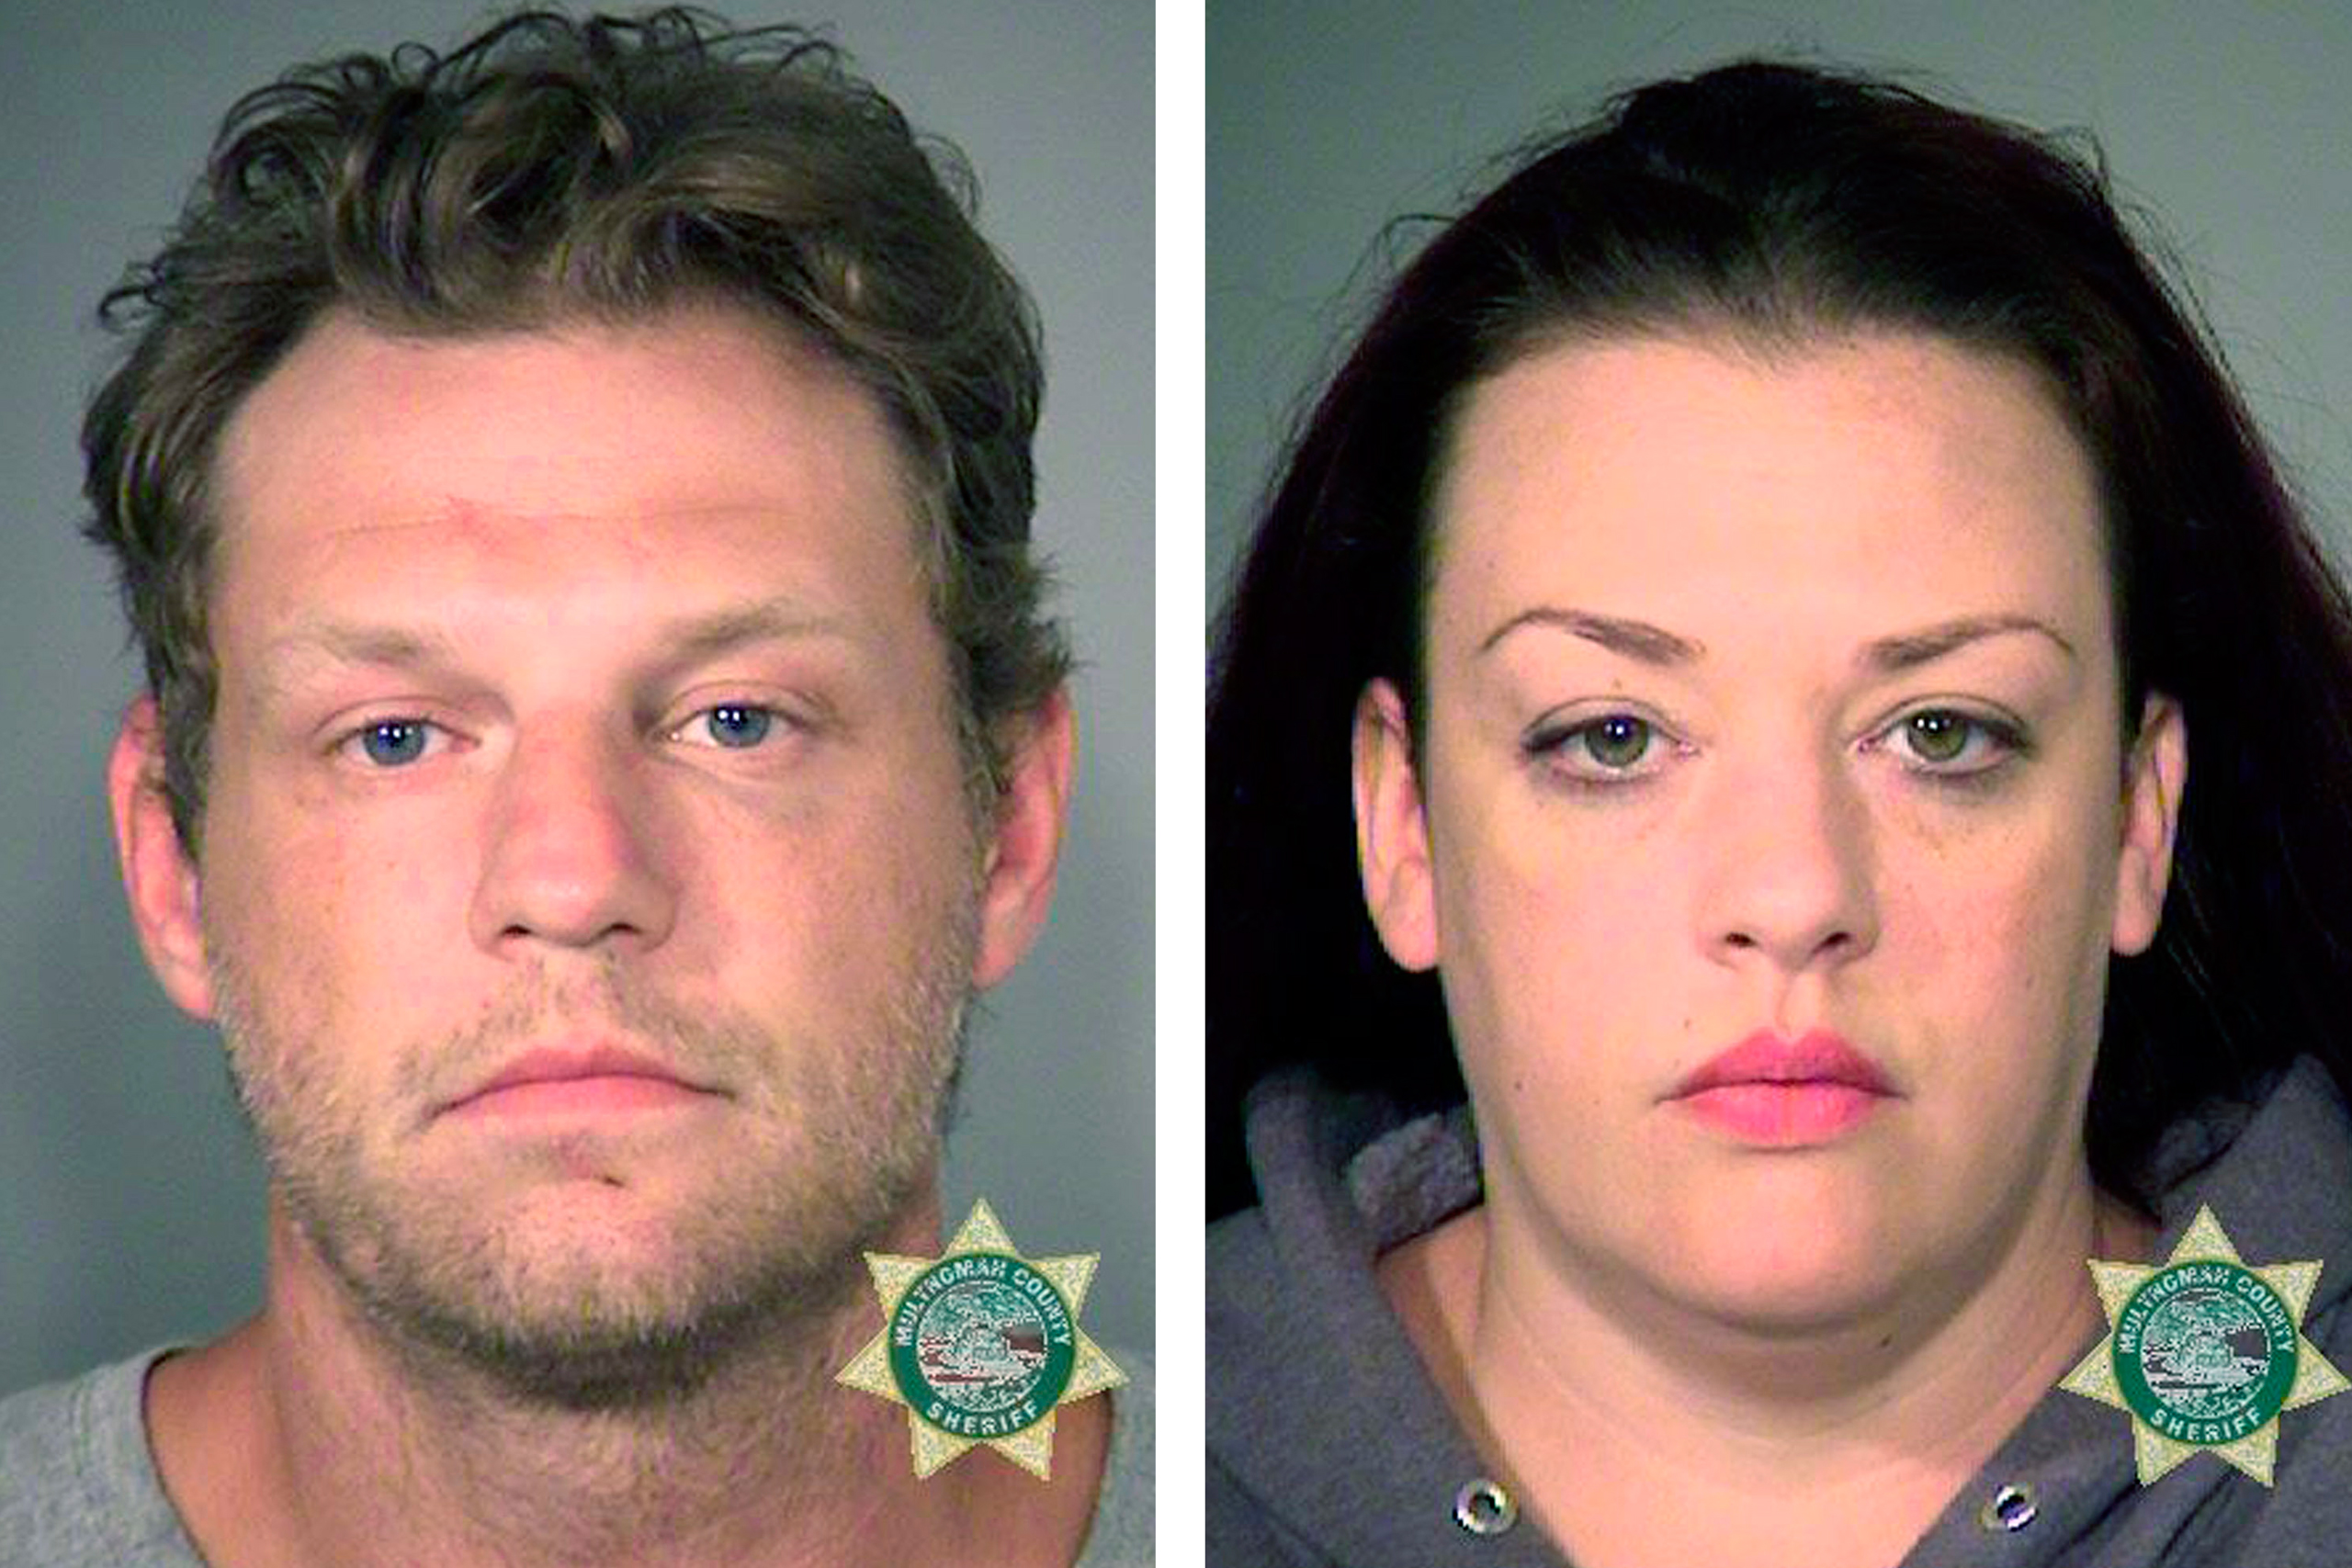 Russell Courtier (left) and Colleen Hunt in undated photos provided by the Multnomah County Sheriff's office. (Multnomah County Sheriff's Office/AP)